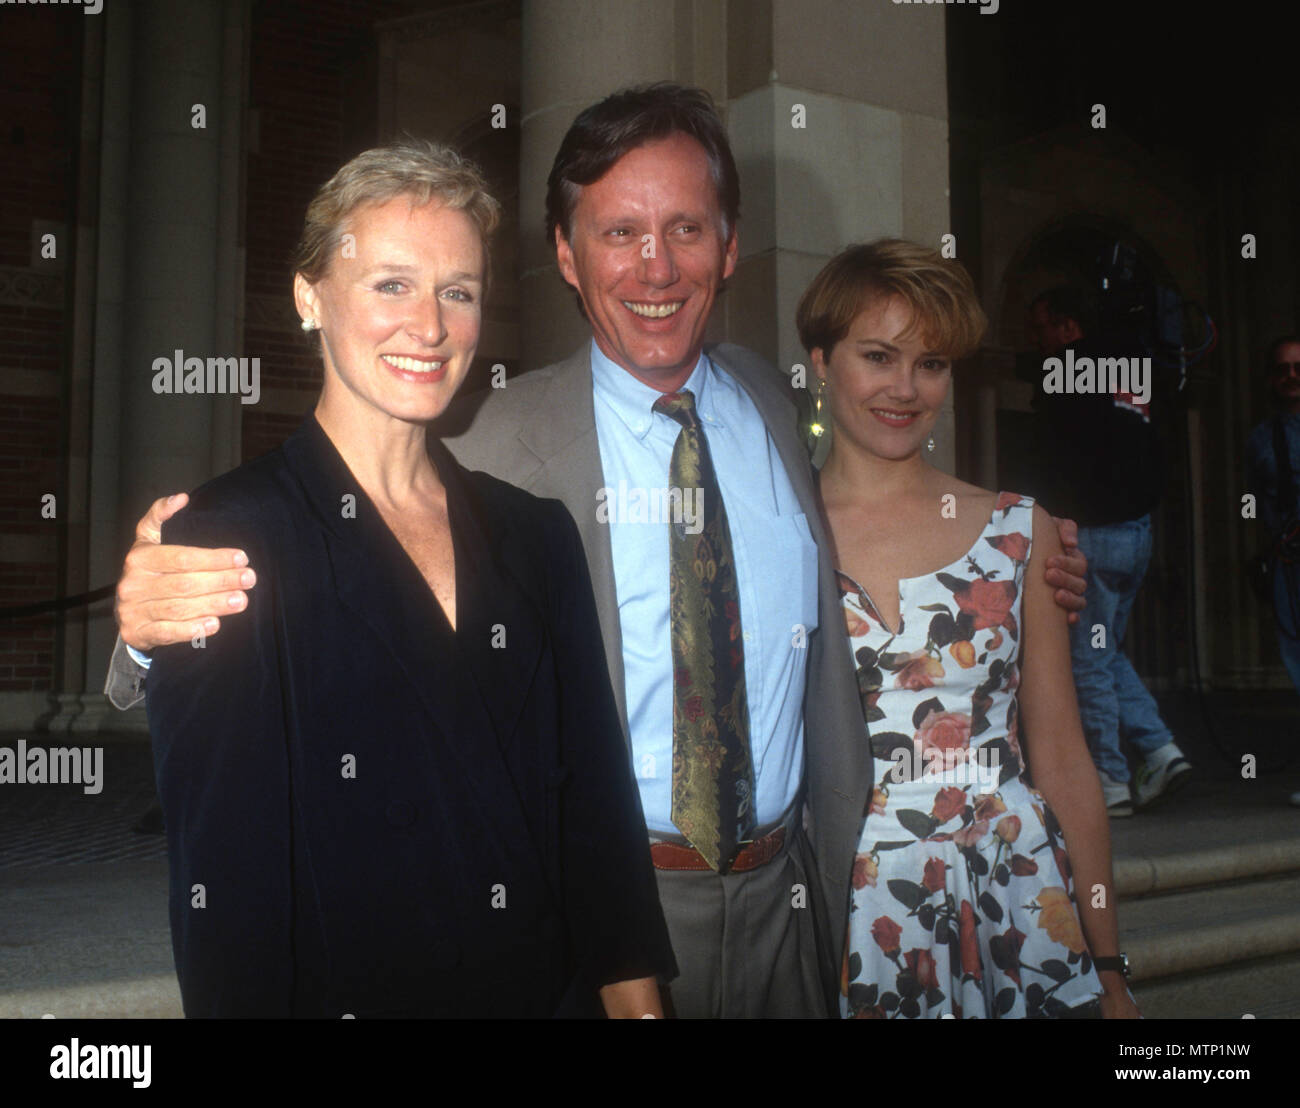 LOS ANGELES, CA - JUNE 28: (L-R) Actress Glenn Close, actor James Woods and girlfriend Julie Tesh attend the UCLA Film & Television Archive and the Academy of Television Arts & Sciences Present the Summerlong Tribute 'Hallmark Hall of Fame: The First 40 Years - 'Anniversary Salute' Gala to Kickoff the Celebration on June 28, 1991 at UCLA's Royce Hall in Westwood, Los Angeles, California. Photo by Barry King/Alamy Stock Photo Stock Photo